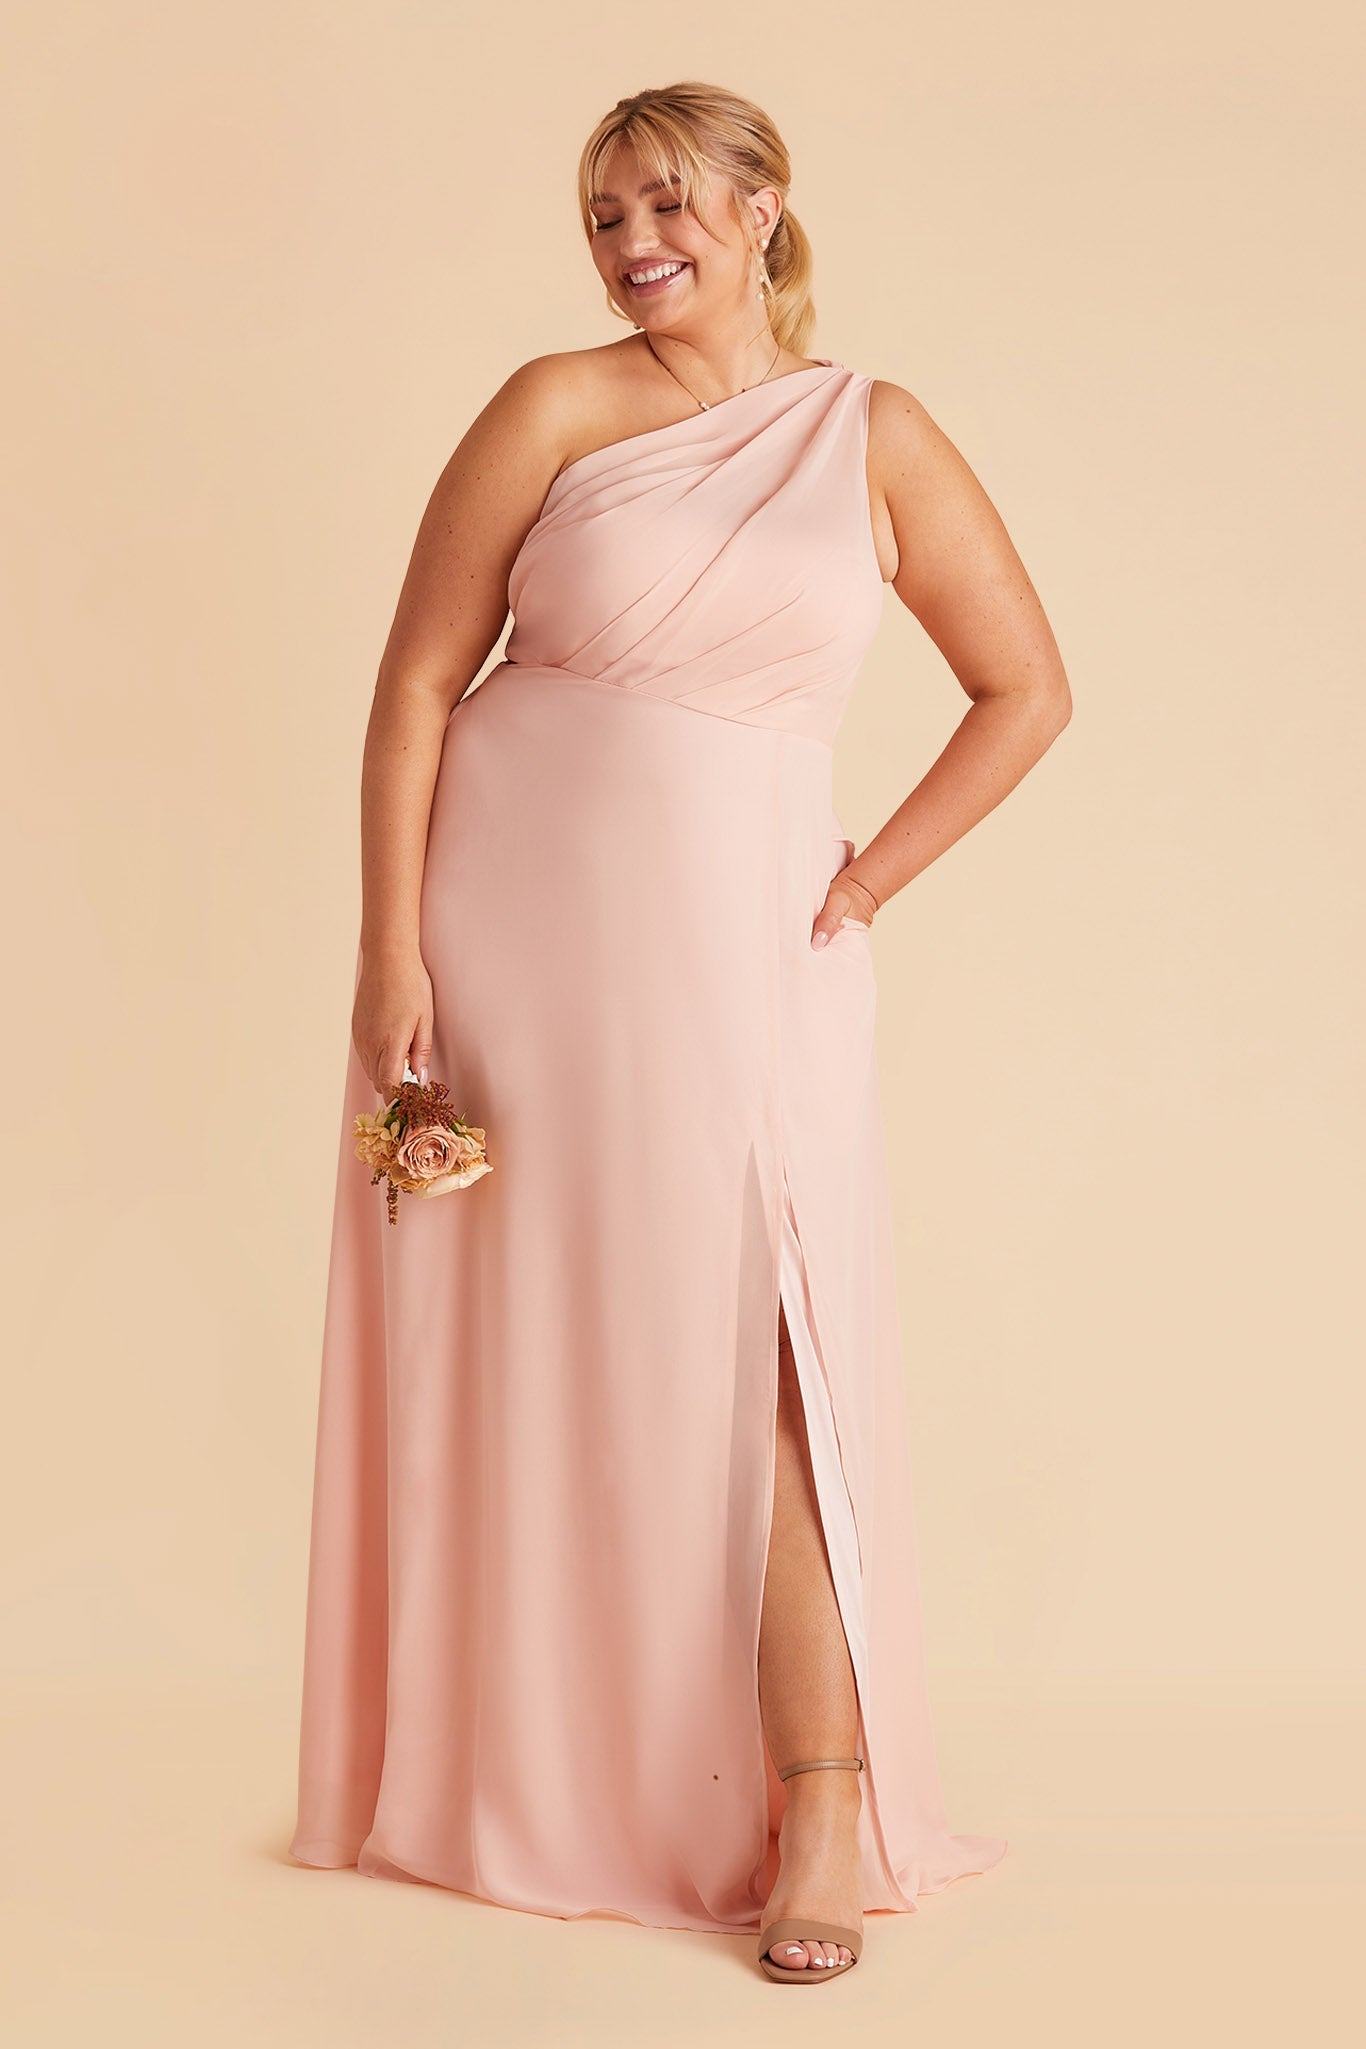 Kira plus size bridesmaid dress with slit in blush pink chiffon by Birdy Grey, front view